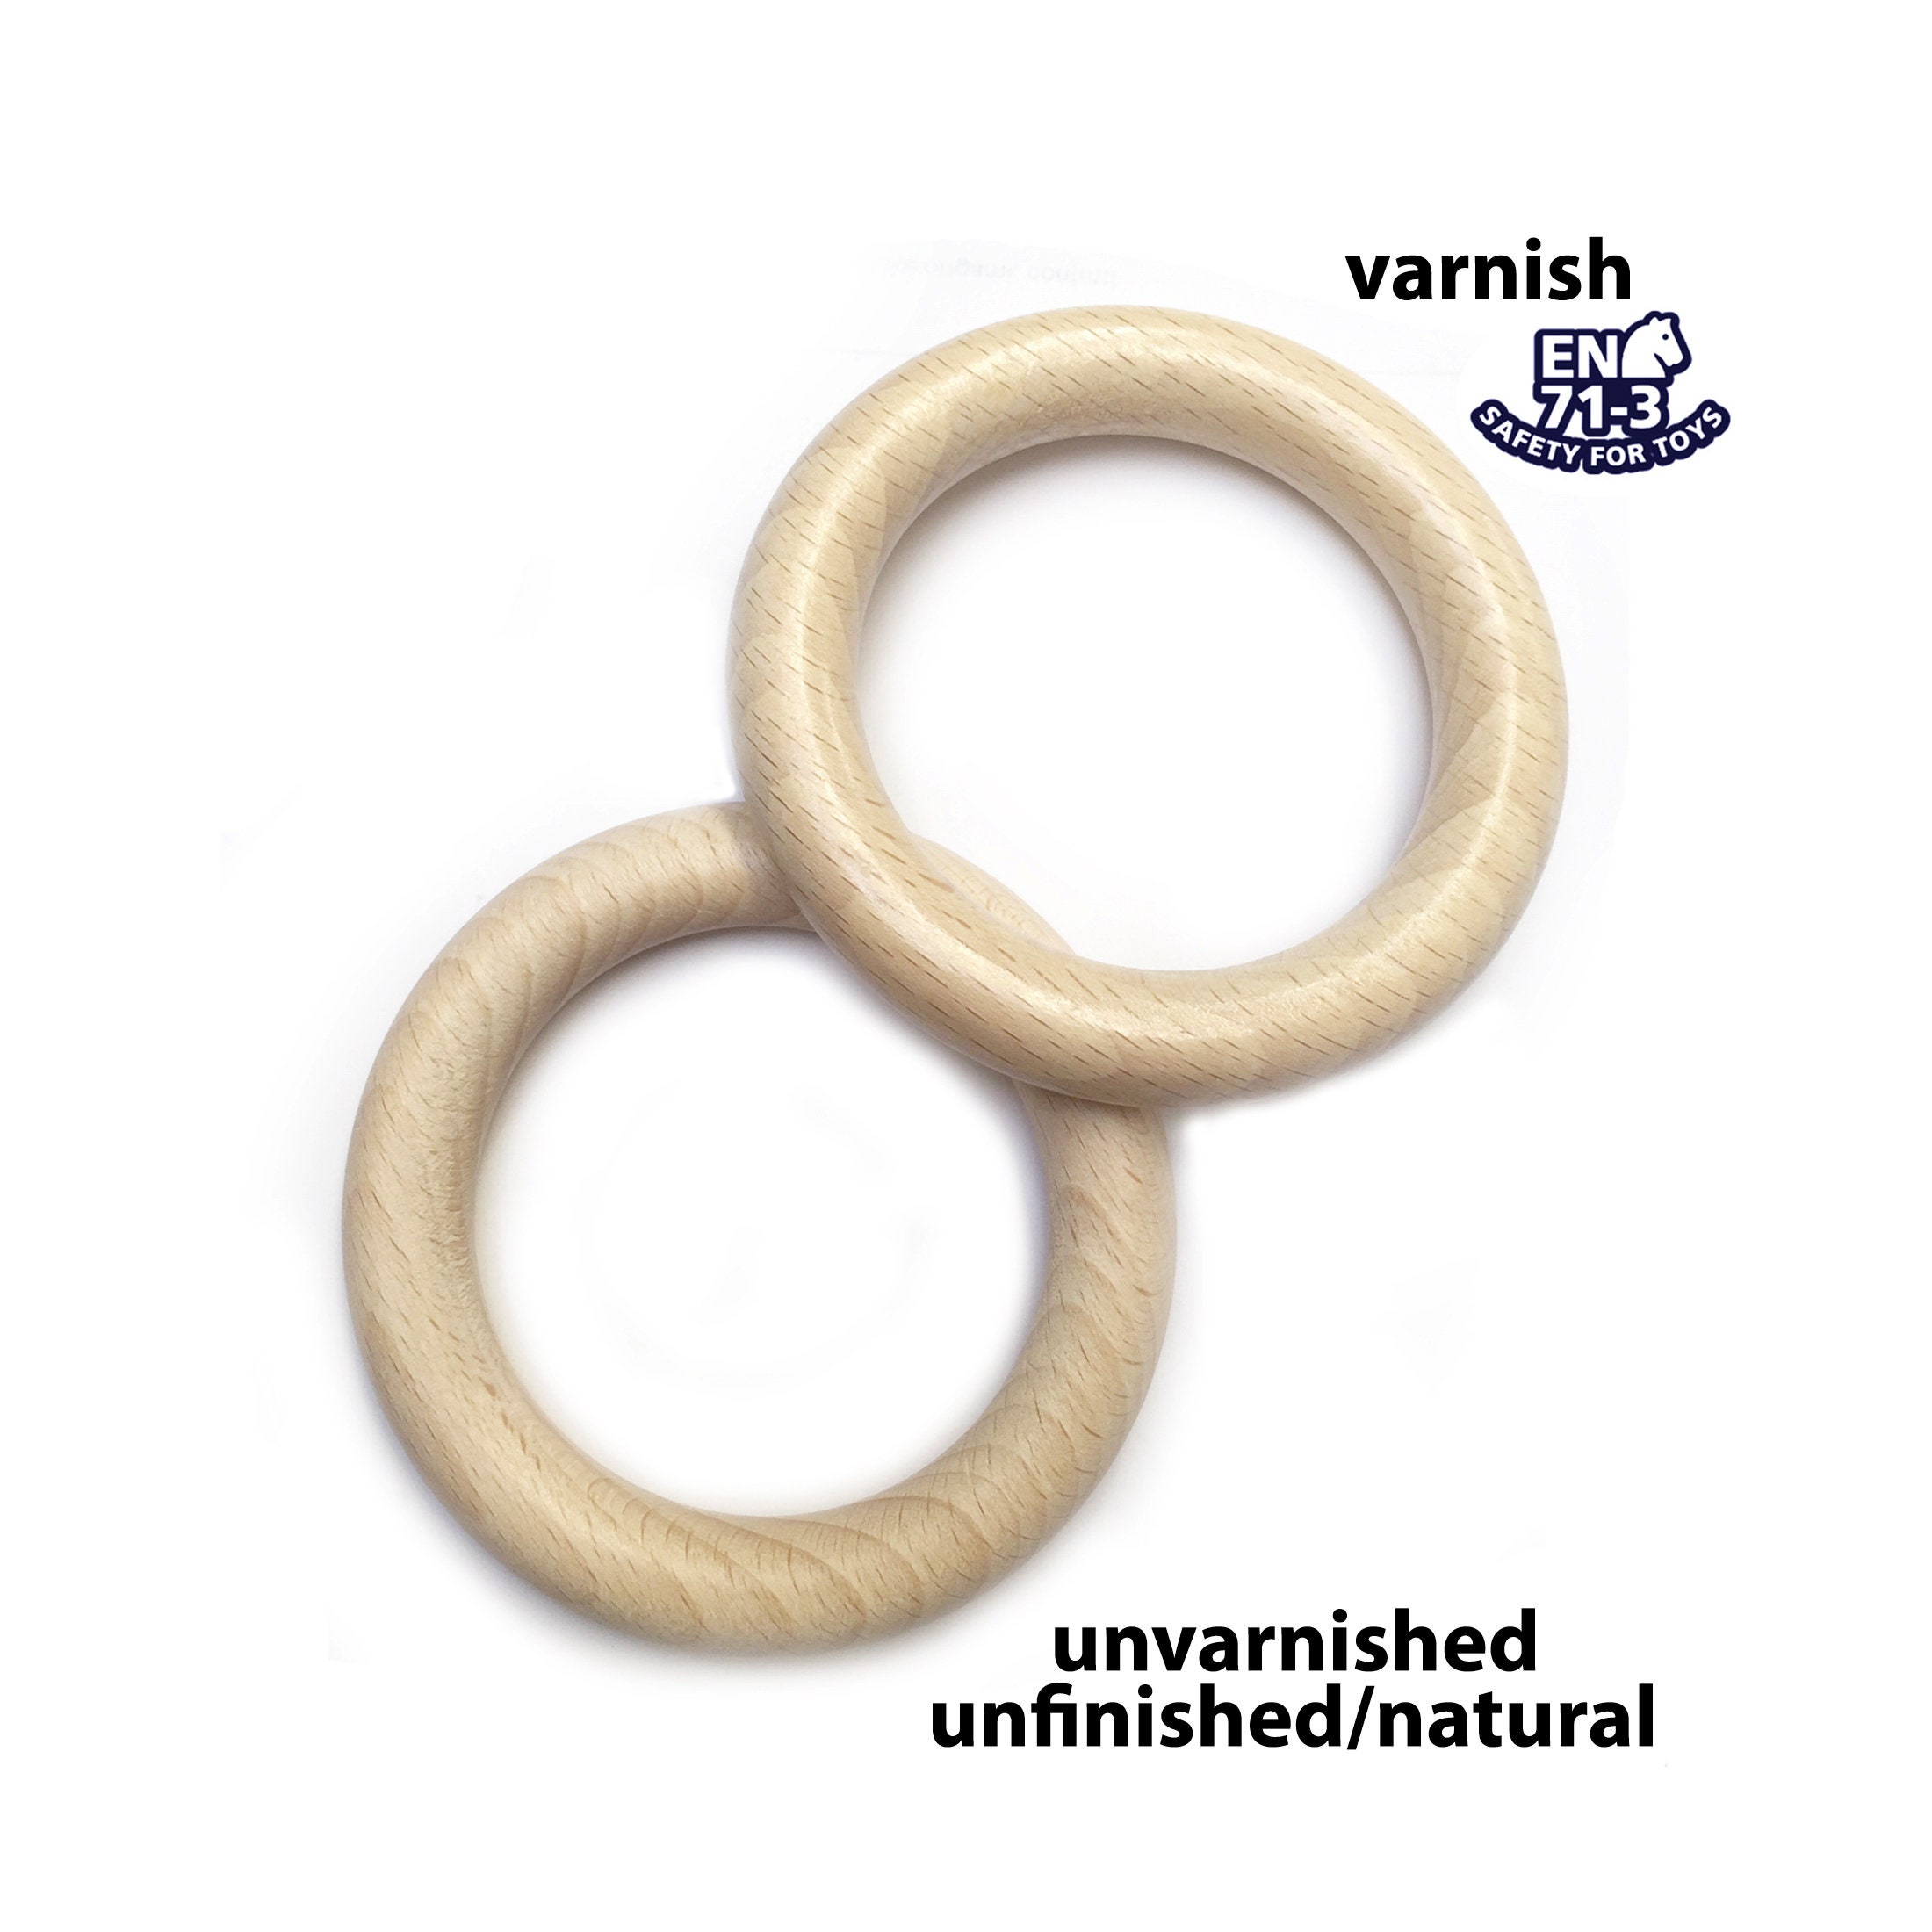 Wooden Rings Natural Colorless Beech Wood Children's Wooden